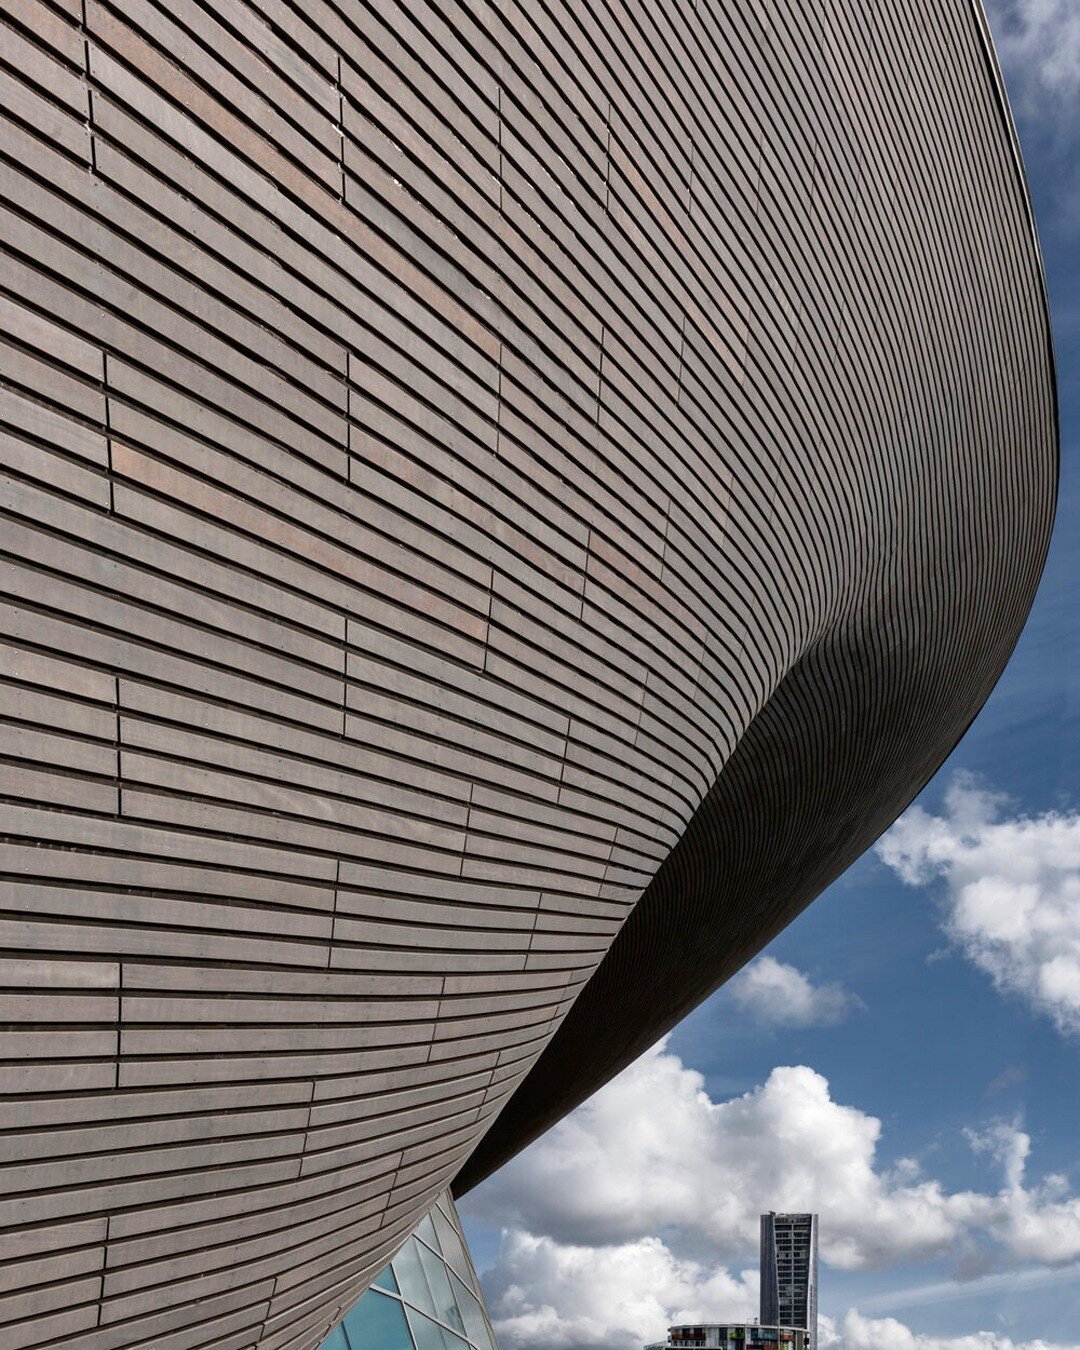 A detail of the cladding on the London Aquatics Centre, built for 2012 Summer Olympics by @zahahadidarchitects.
.
.
.
.
.
@londonaquaticcentre #2012olympics #eastlondon #stratford #London #uk #zahahadid #zahahadidarchitects